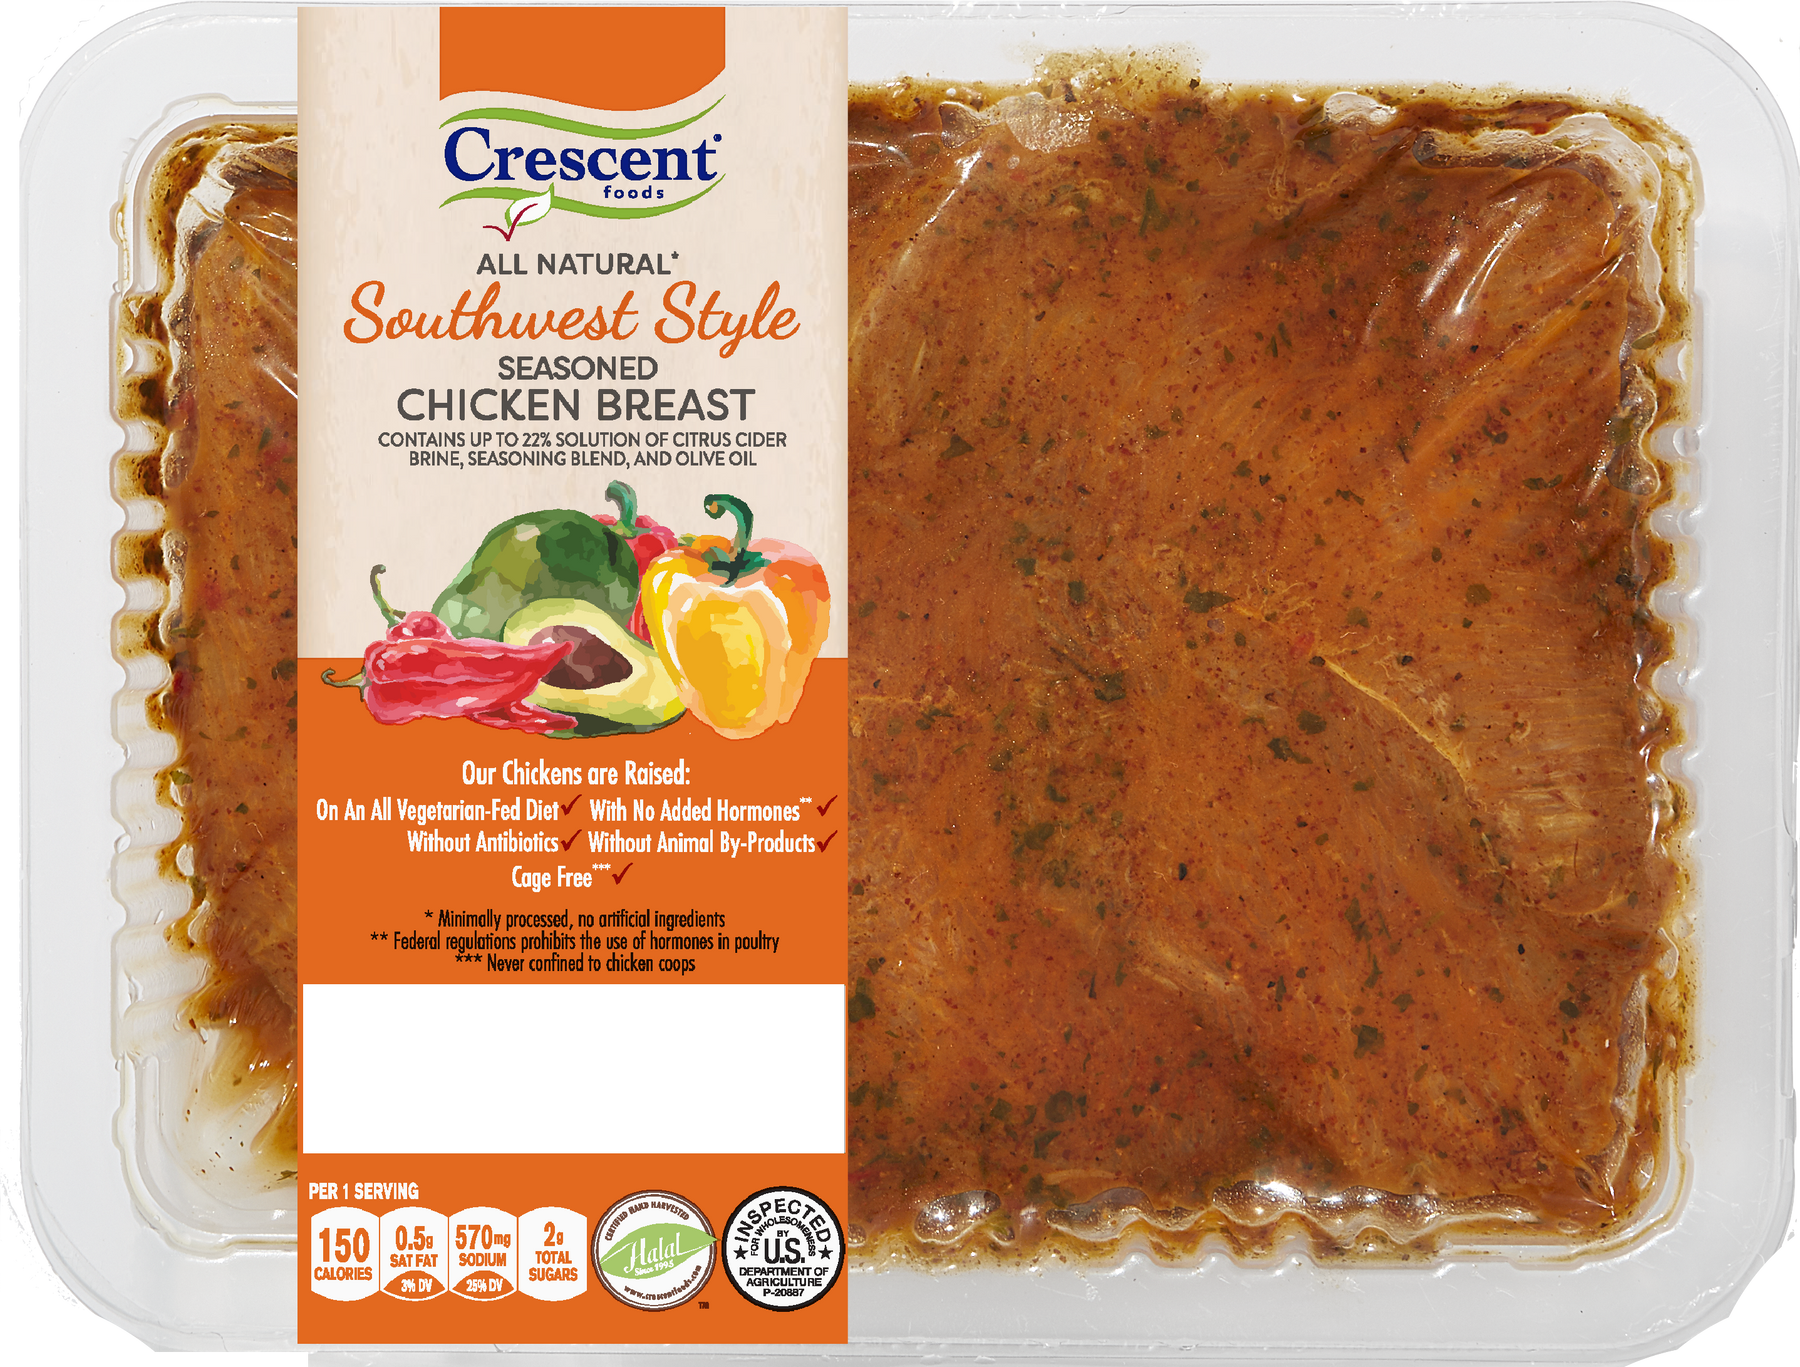 Crescent South West Style Seasoned Breast Plated